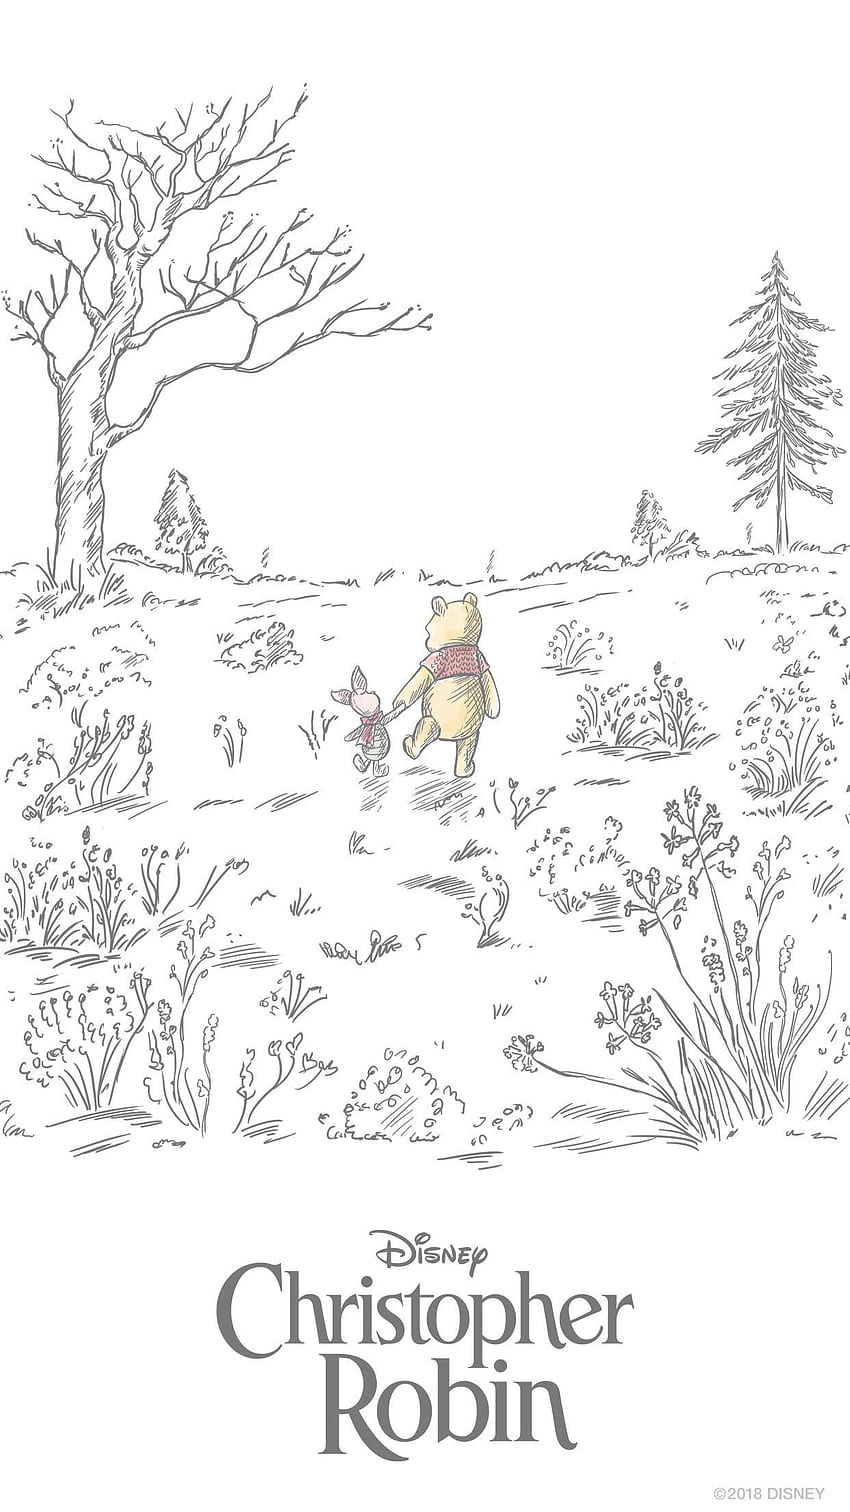 Pooh Isms That Are Essential To Everyday Life. Disney, Winnie the Pooh HD phone wallpaper